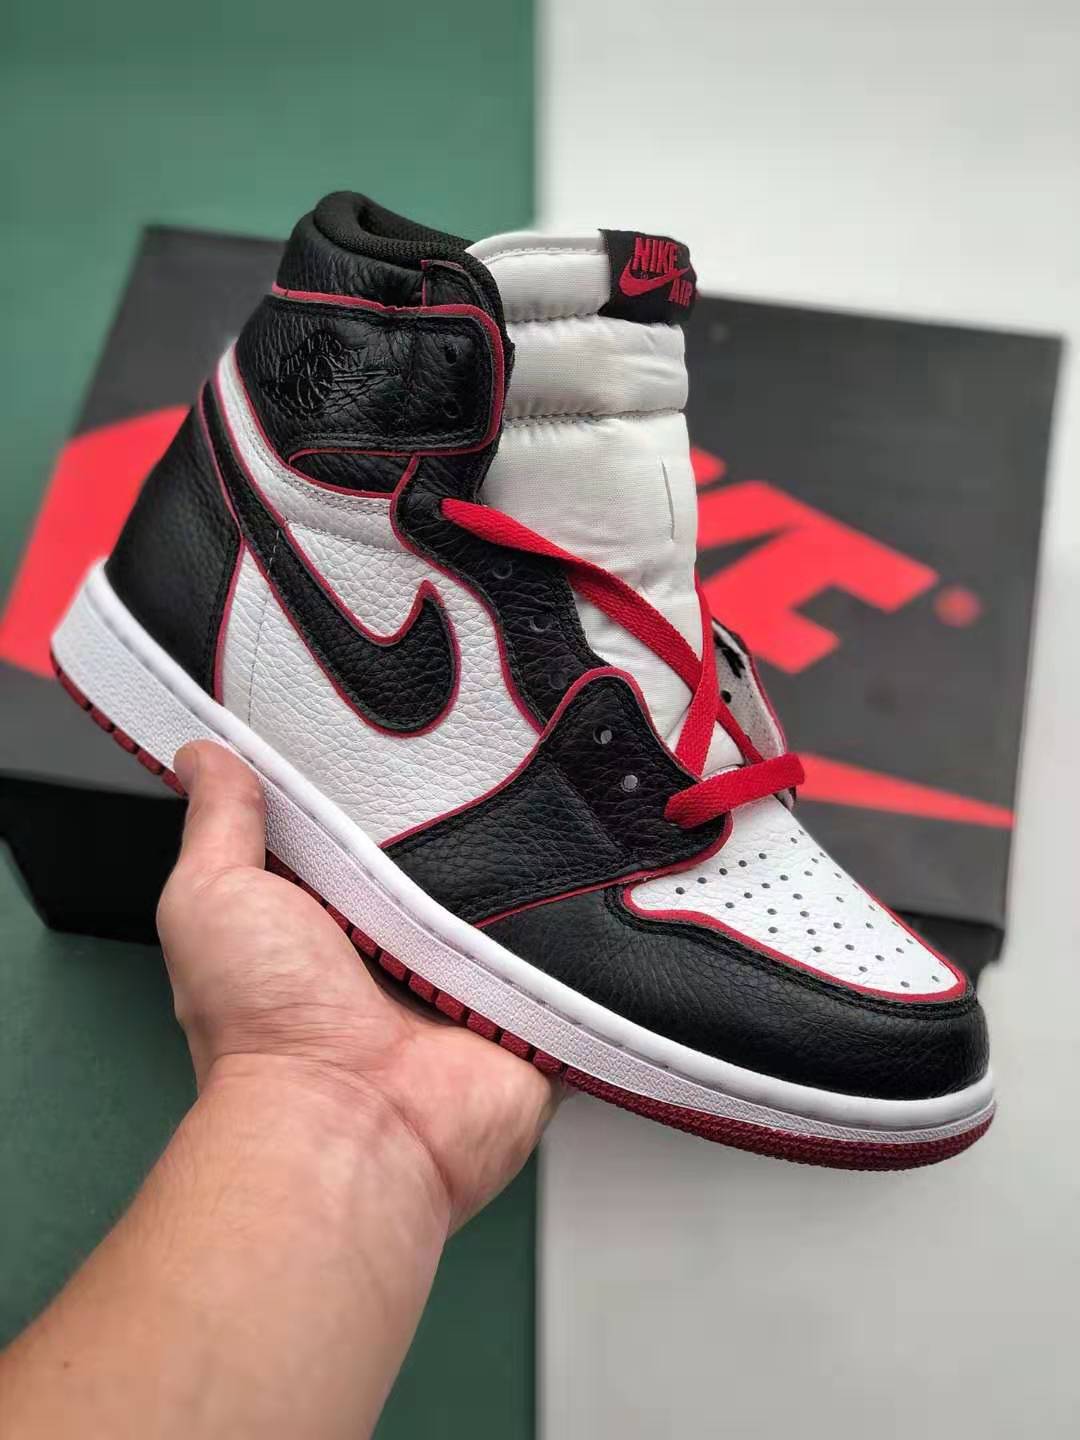 Air Jordan 1 Retro High OG 'Bloodline' 555088-062 - Authentic Classic Shoe for Sneaker Enthusiasts